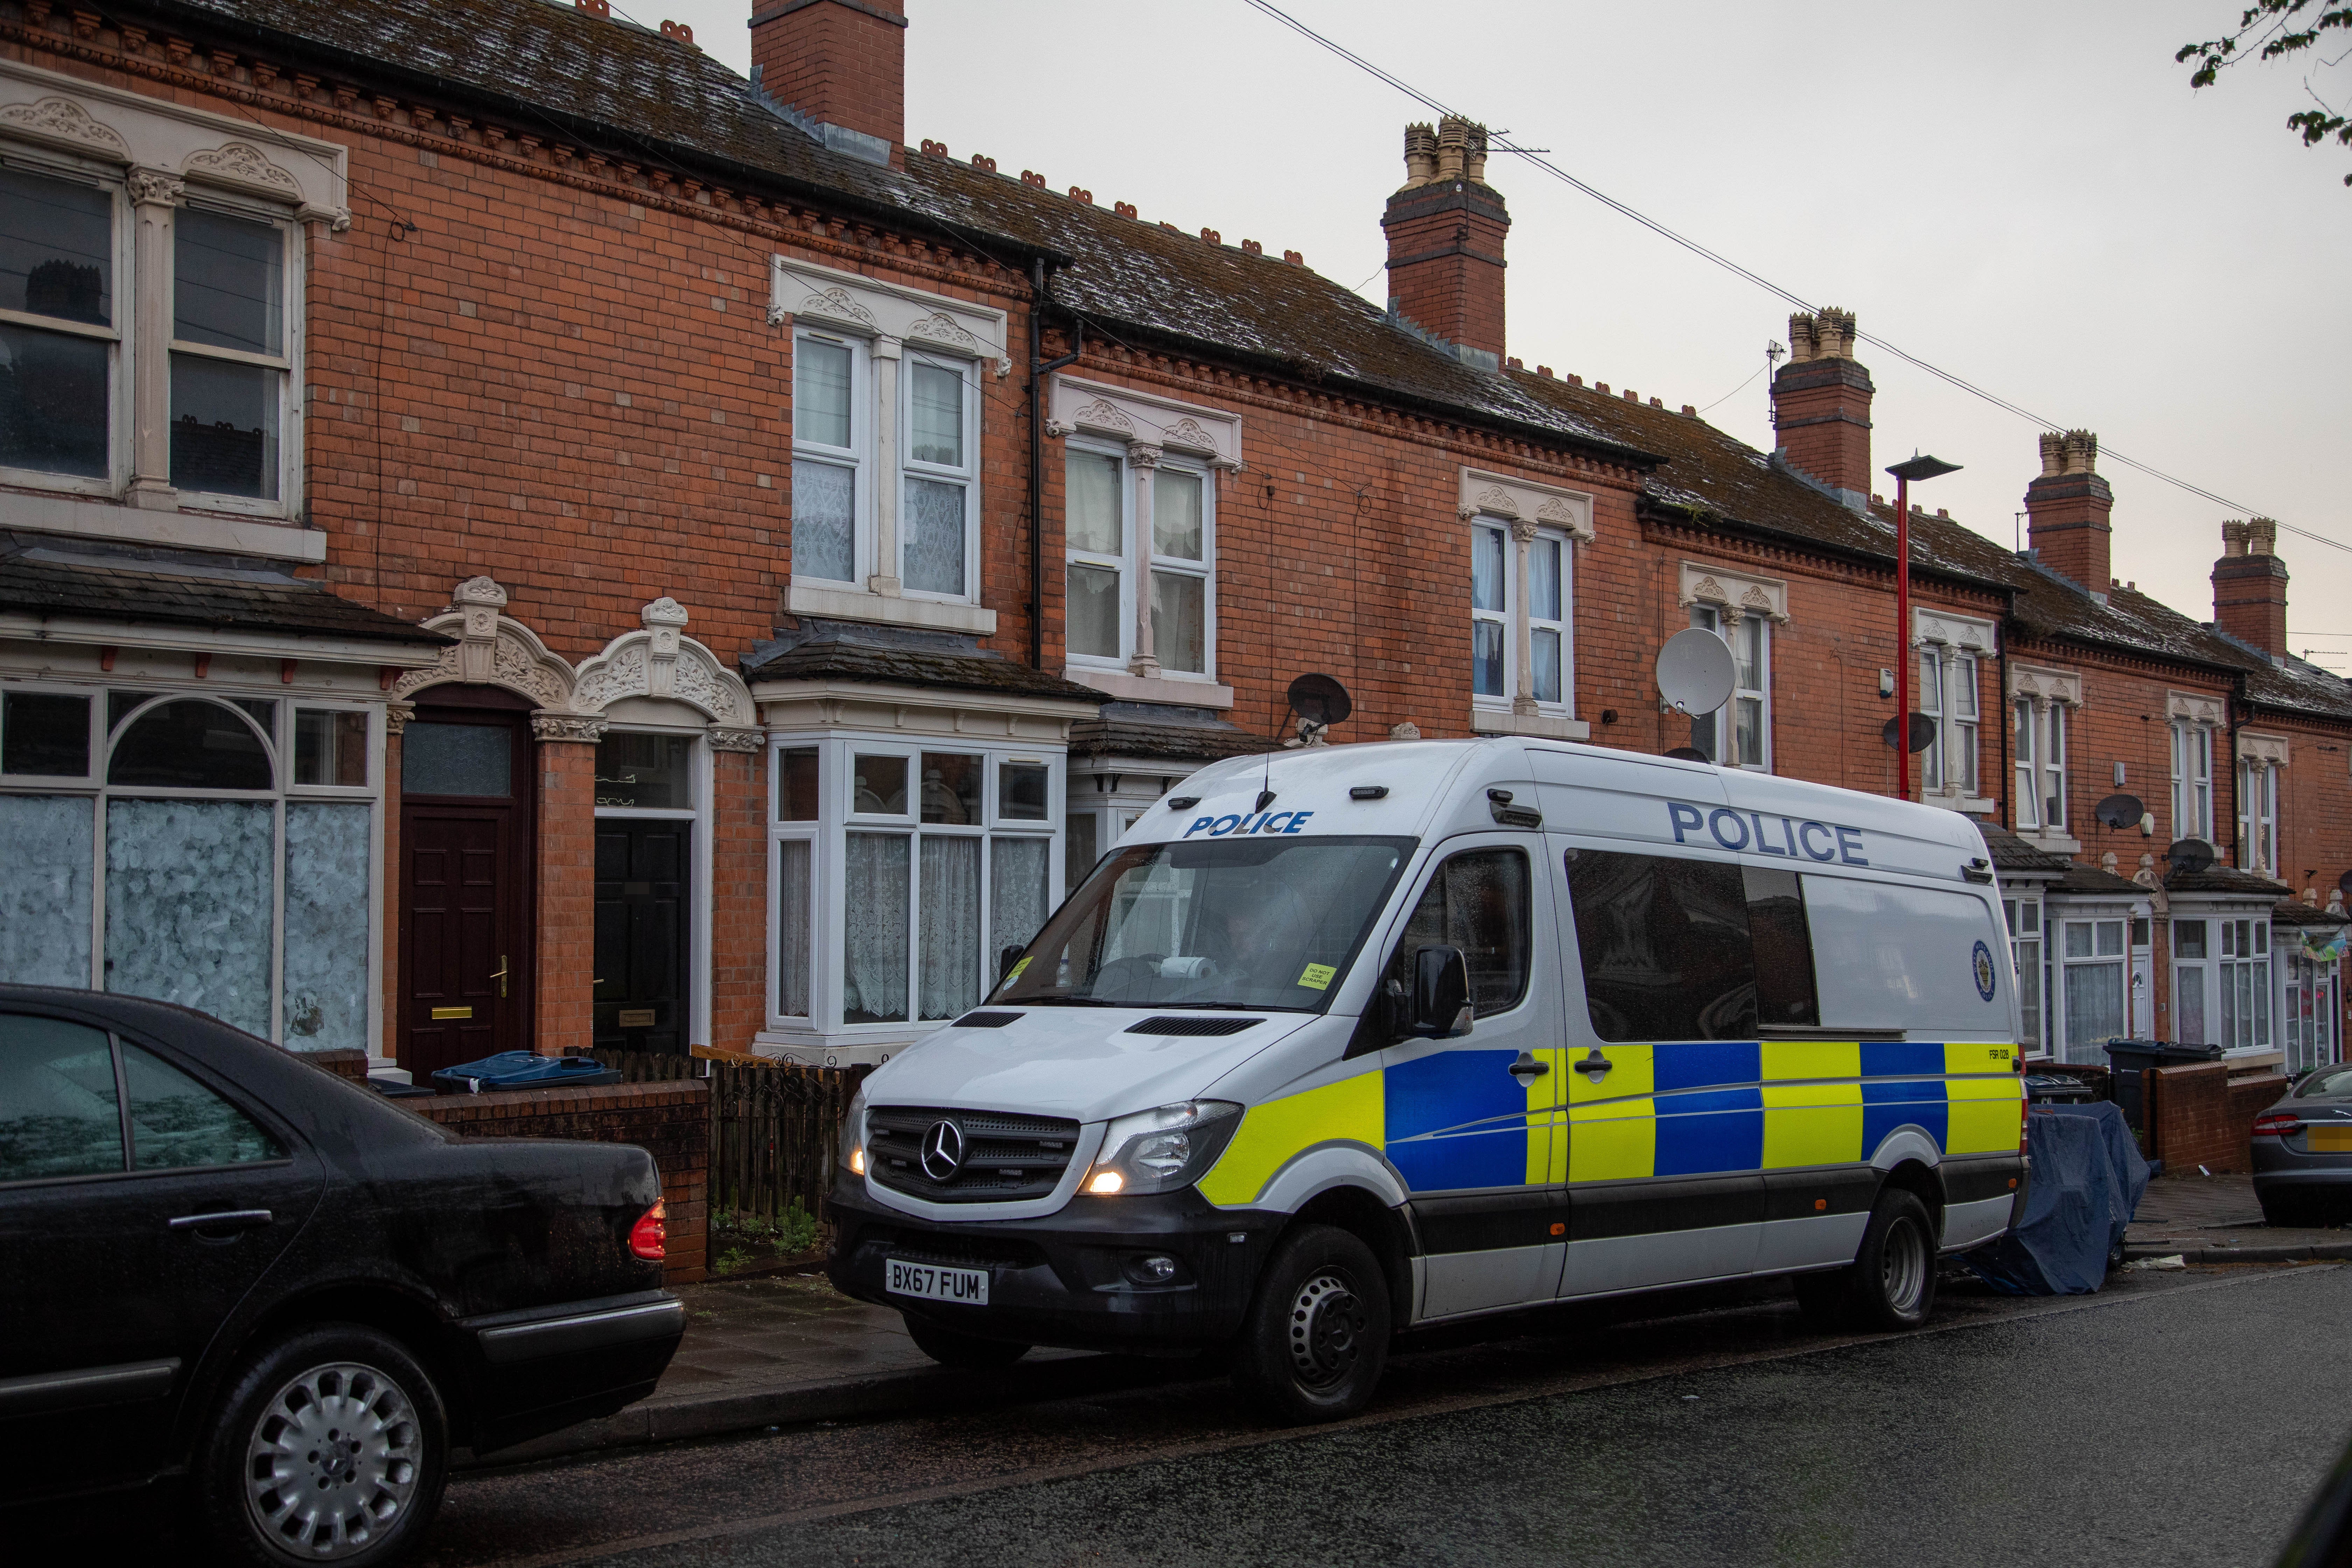 A man and woman have been arrested as police investigate the death